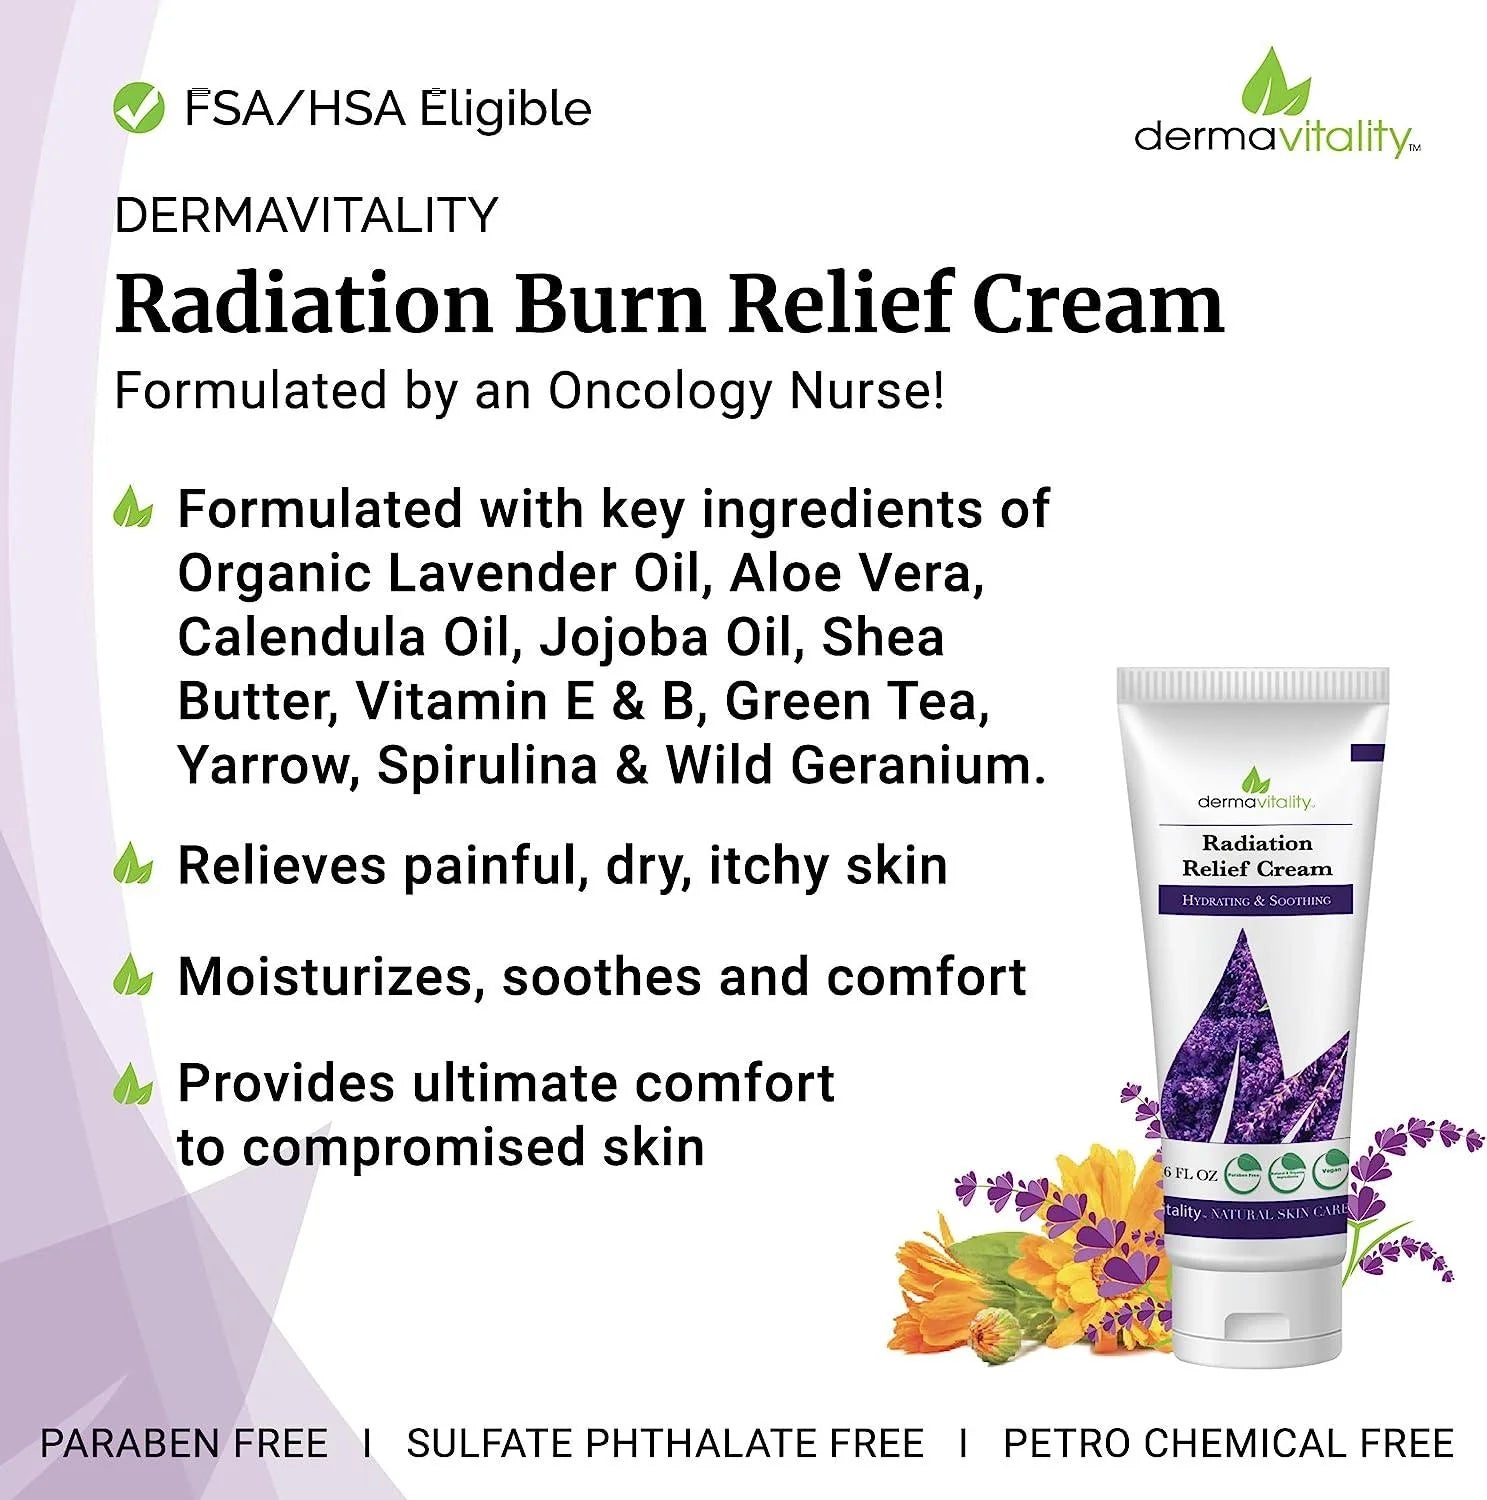 Radiation Burn Cream for Radiation Therapy Patients